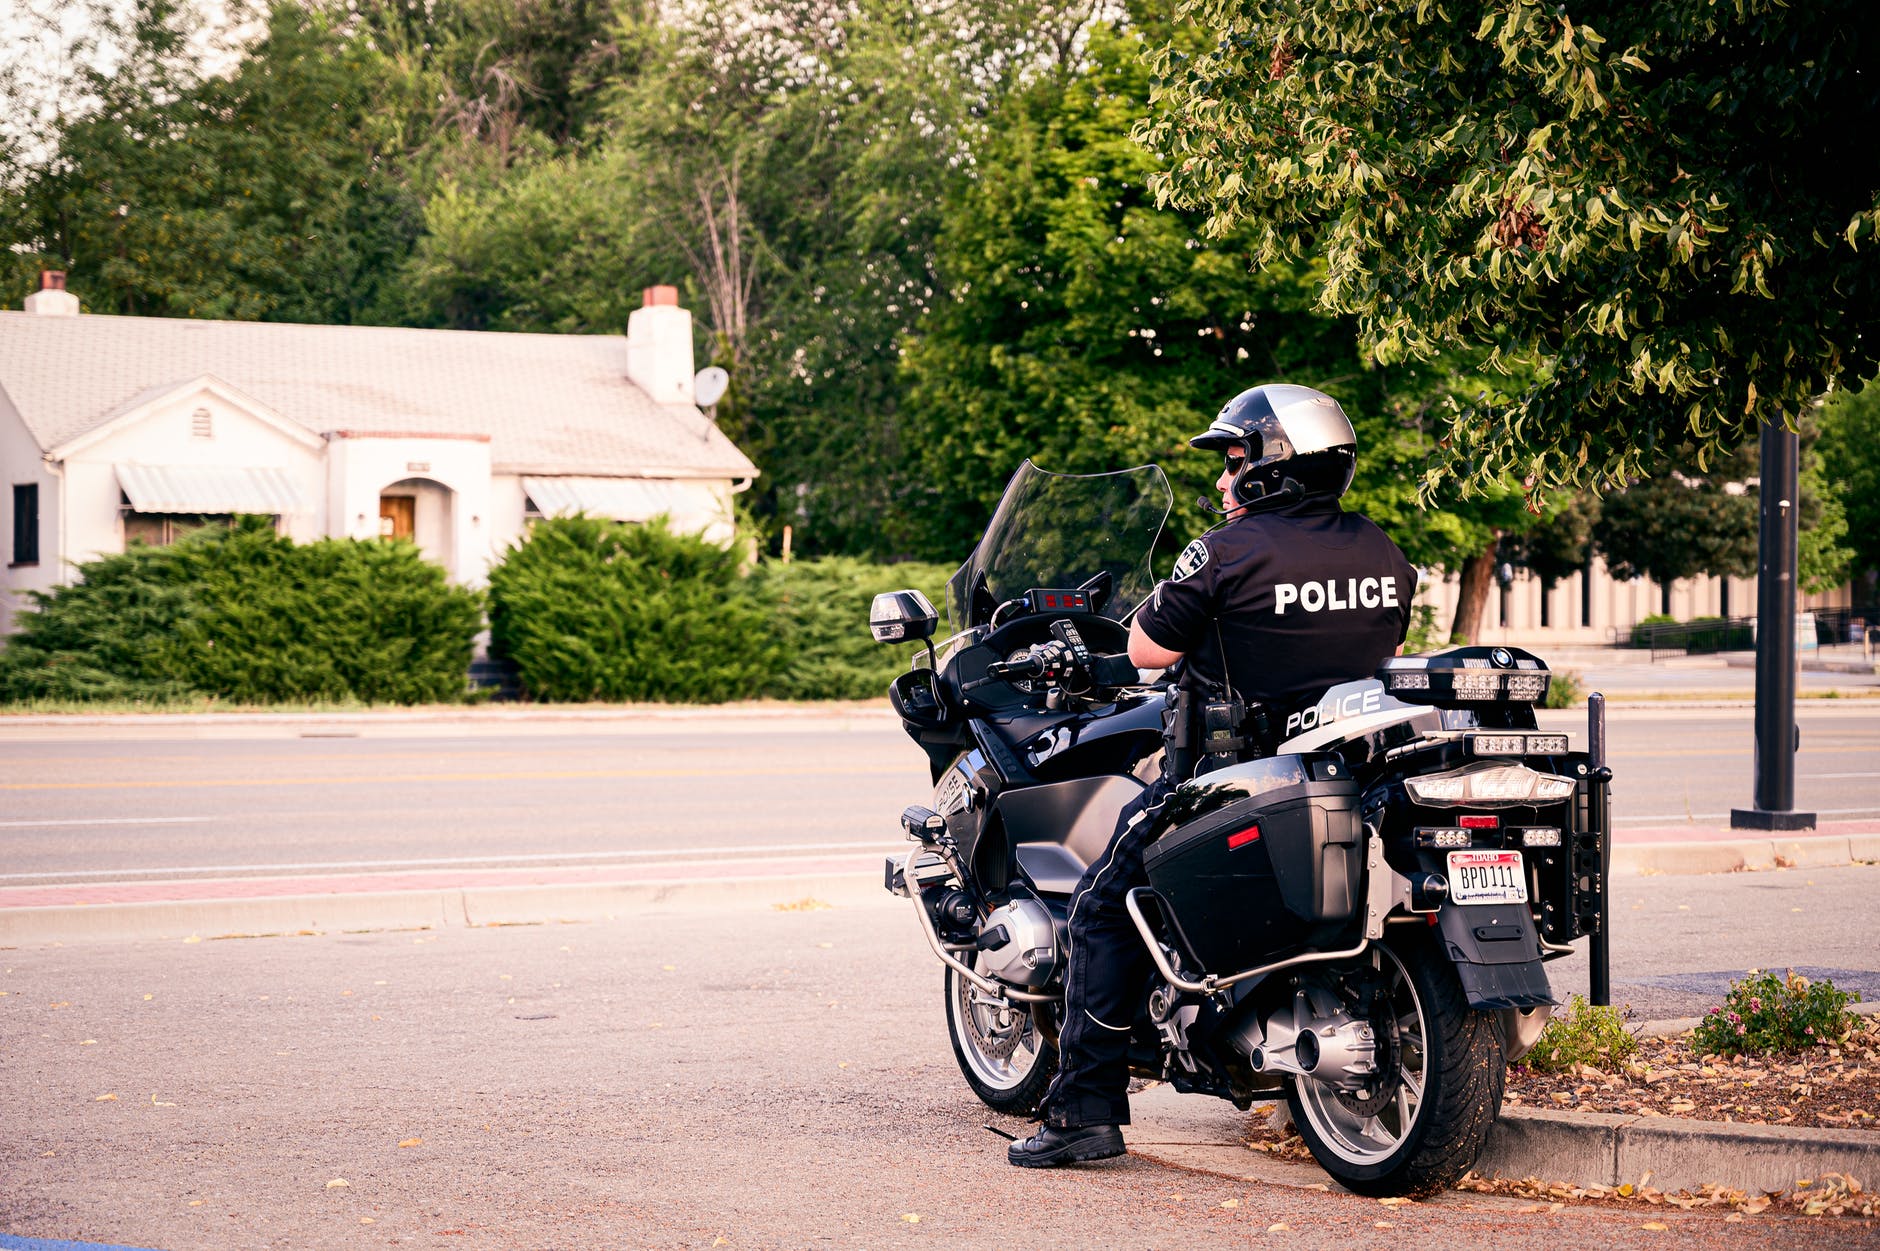 A police officer sitting on his bike during a road patrol. | Photo: Pexels